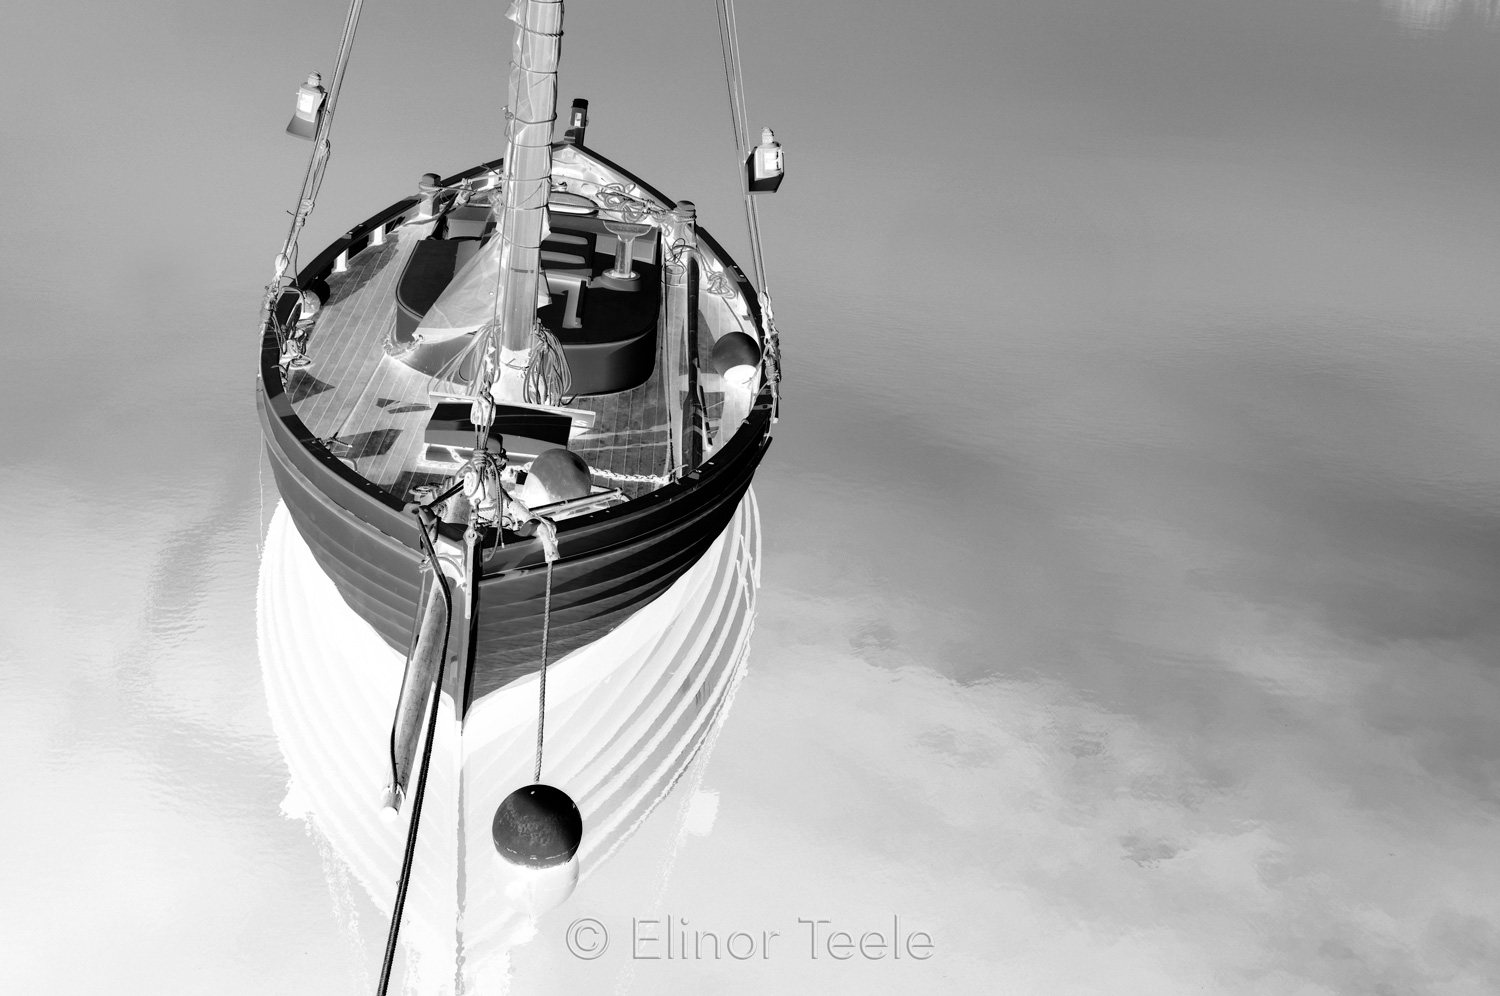 Boat & Mooring - Black & White Abstract